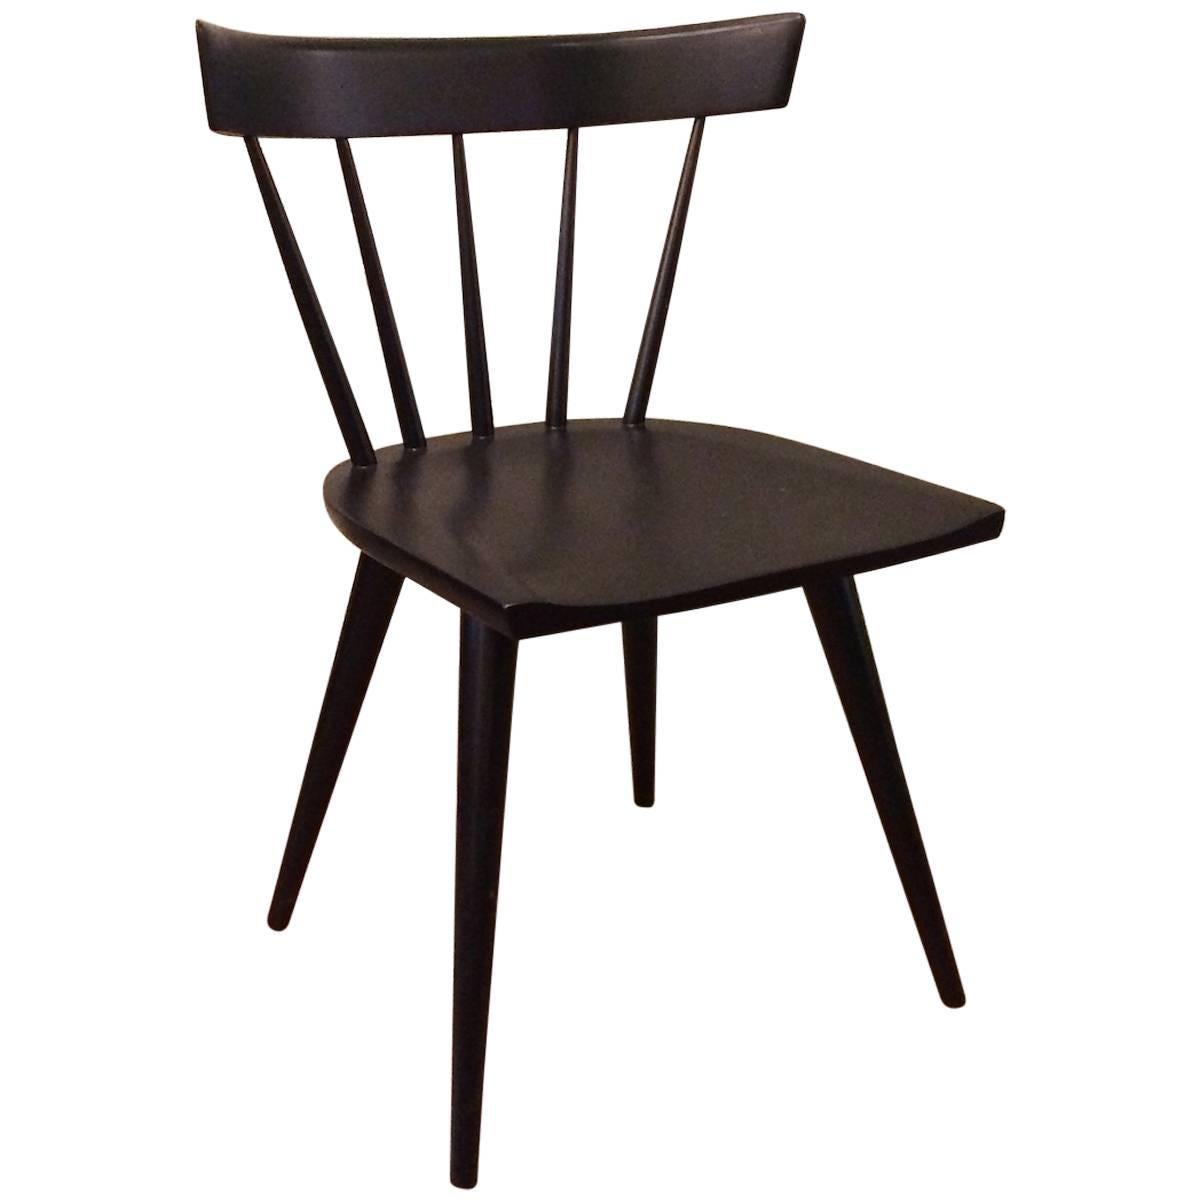 Paul McCobb Planner Group Windsor Style Spindle Back Chair